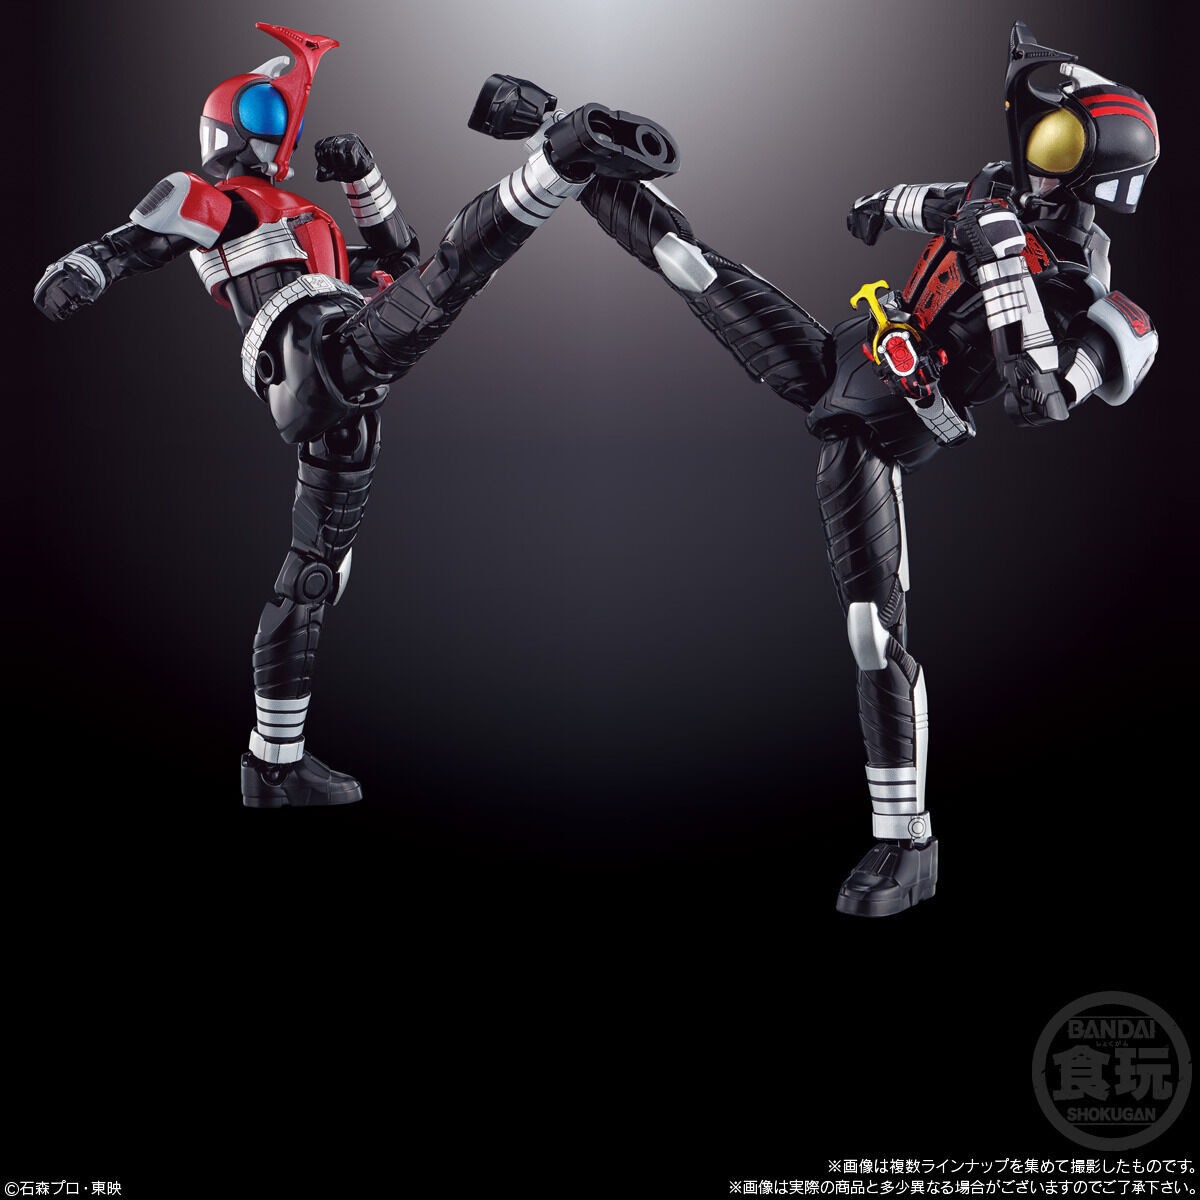 SO-DO CHRONICLE 仮面ライダーカブト2(10個入) 仮面ライダーカブト フィギュア・プラモデル・プラキット  バンダイナムコグループ公式通販サイト